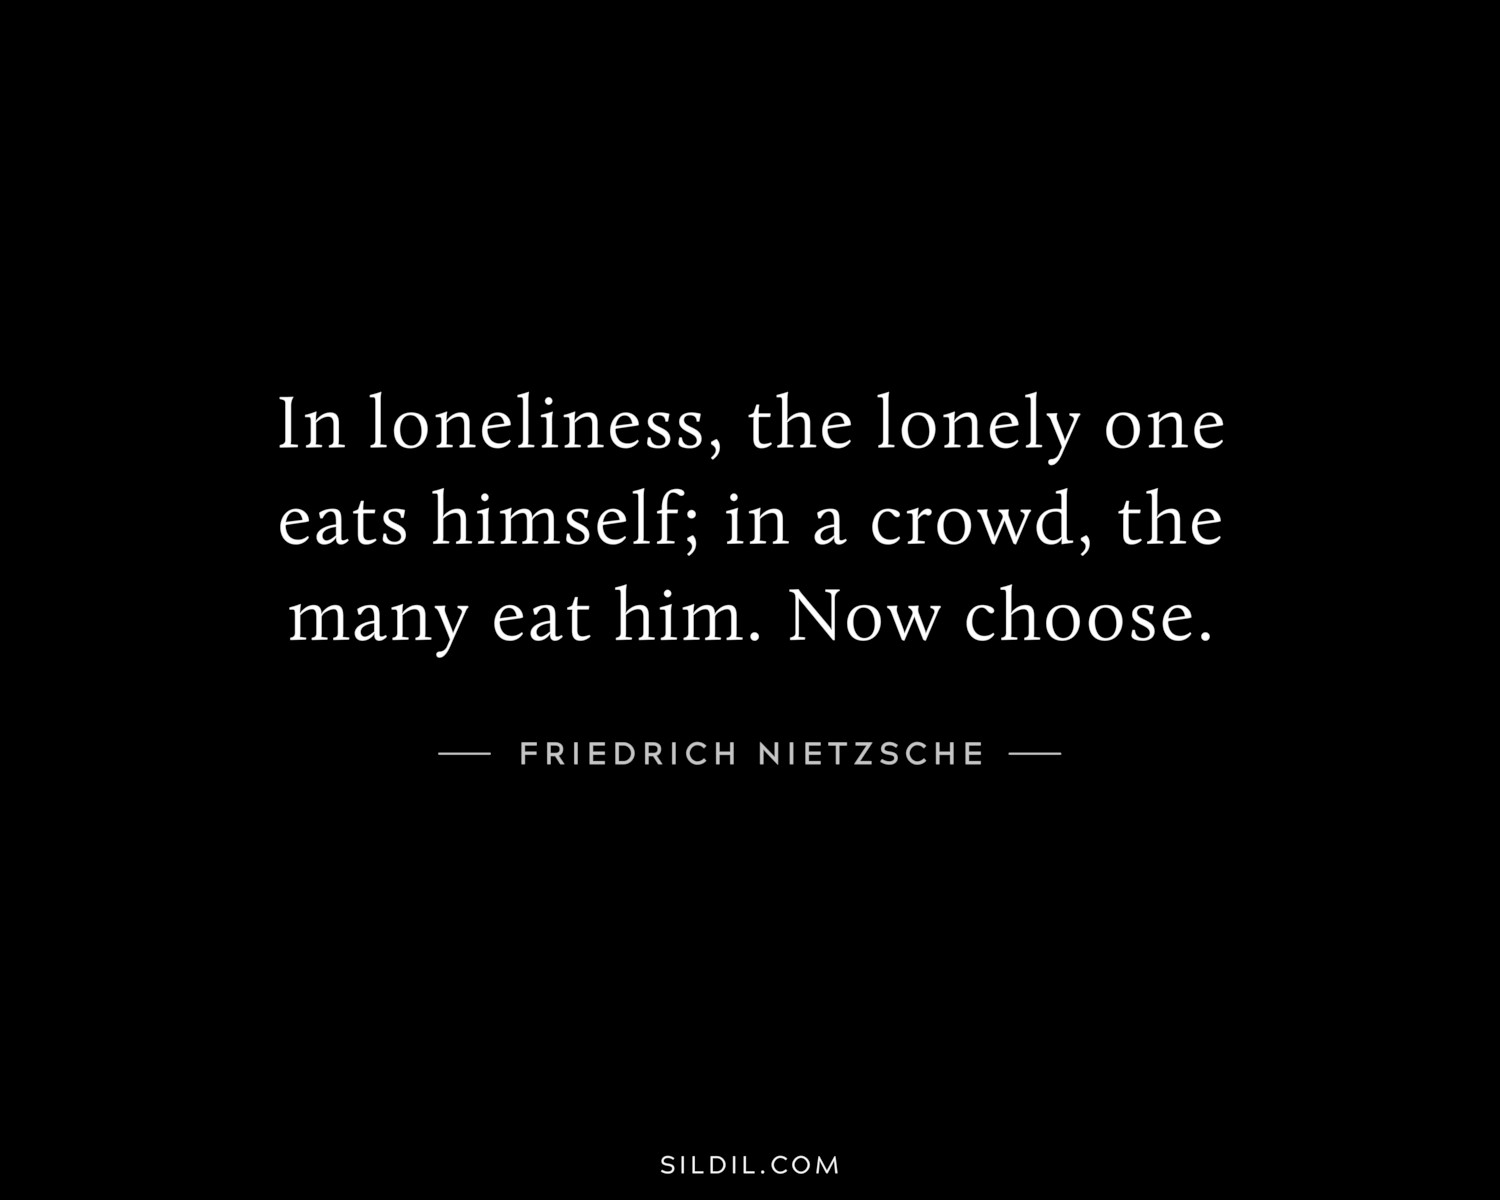 In loneliness, the lonely one eats himself; in a crowd, the many eat him. Now choose.